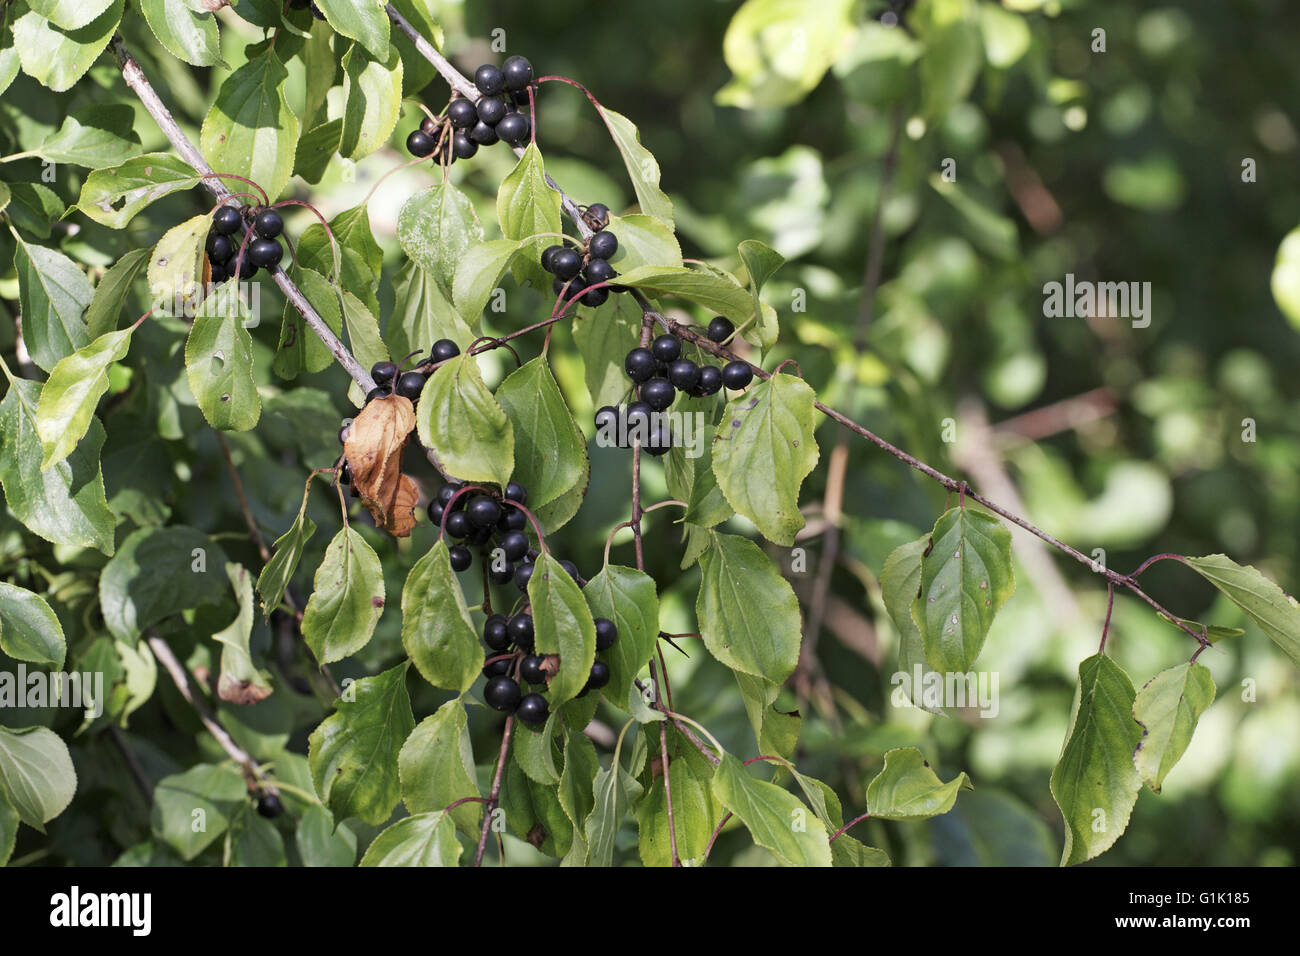 Buckthorn Rhamnus catharticus fruit and leaves Stock Photo